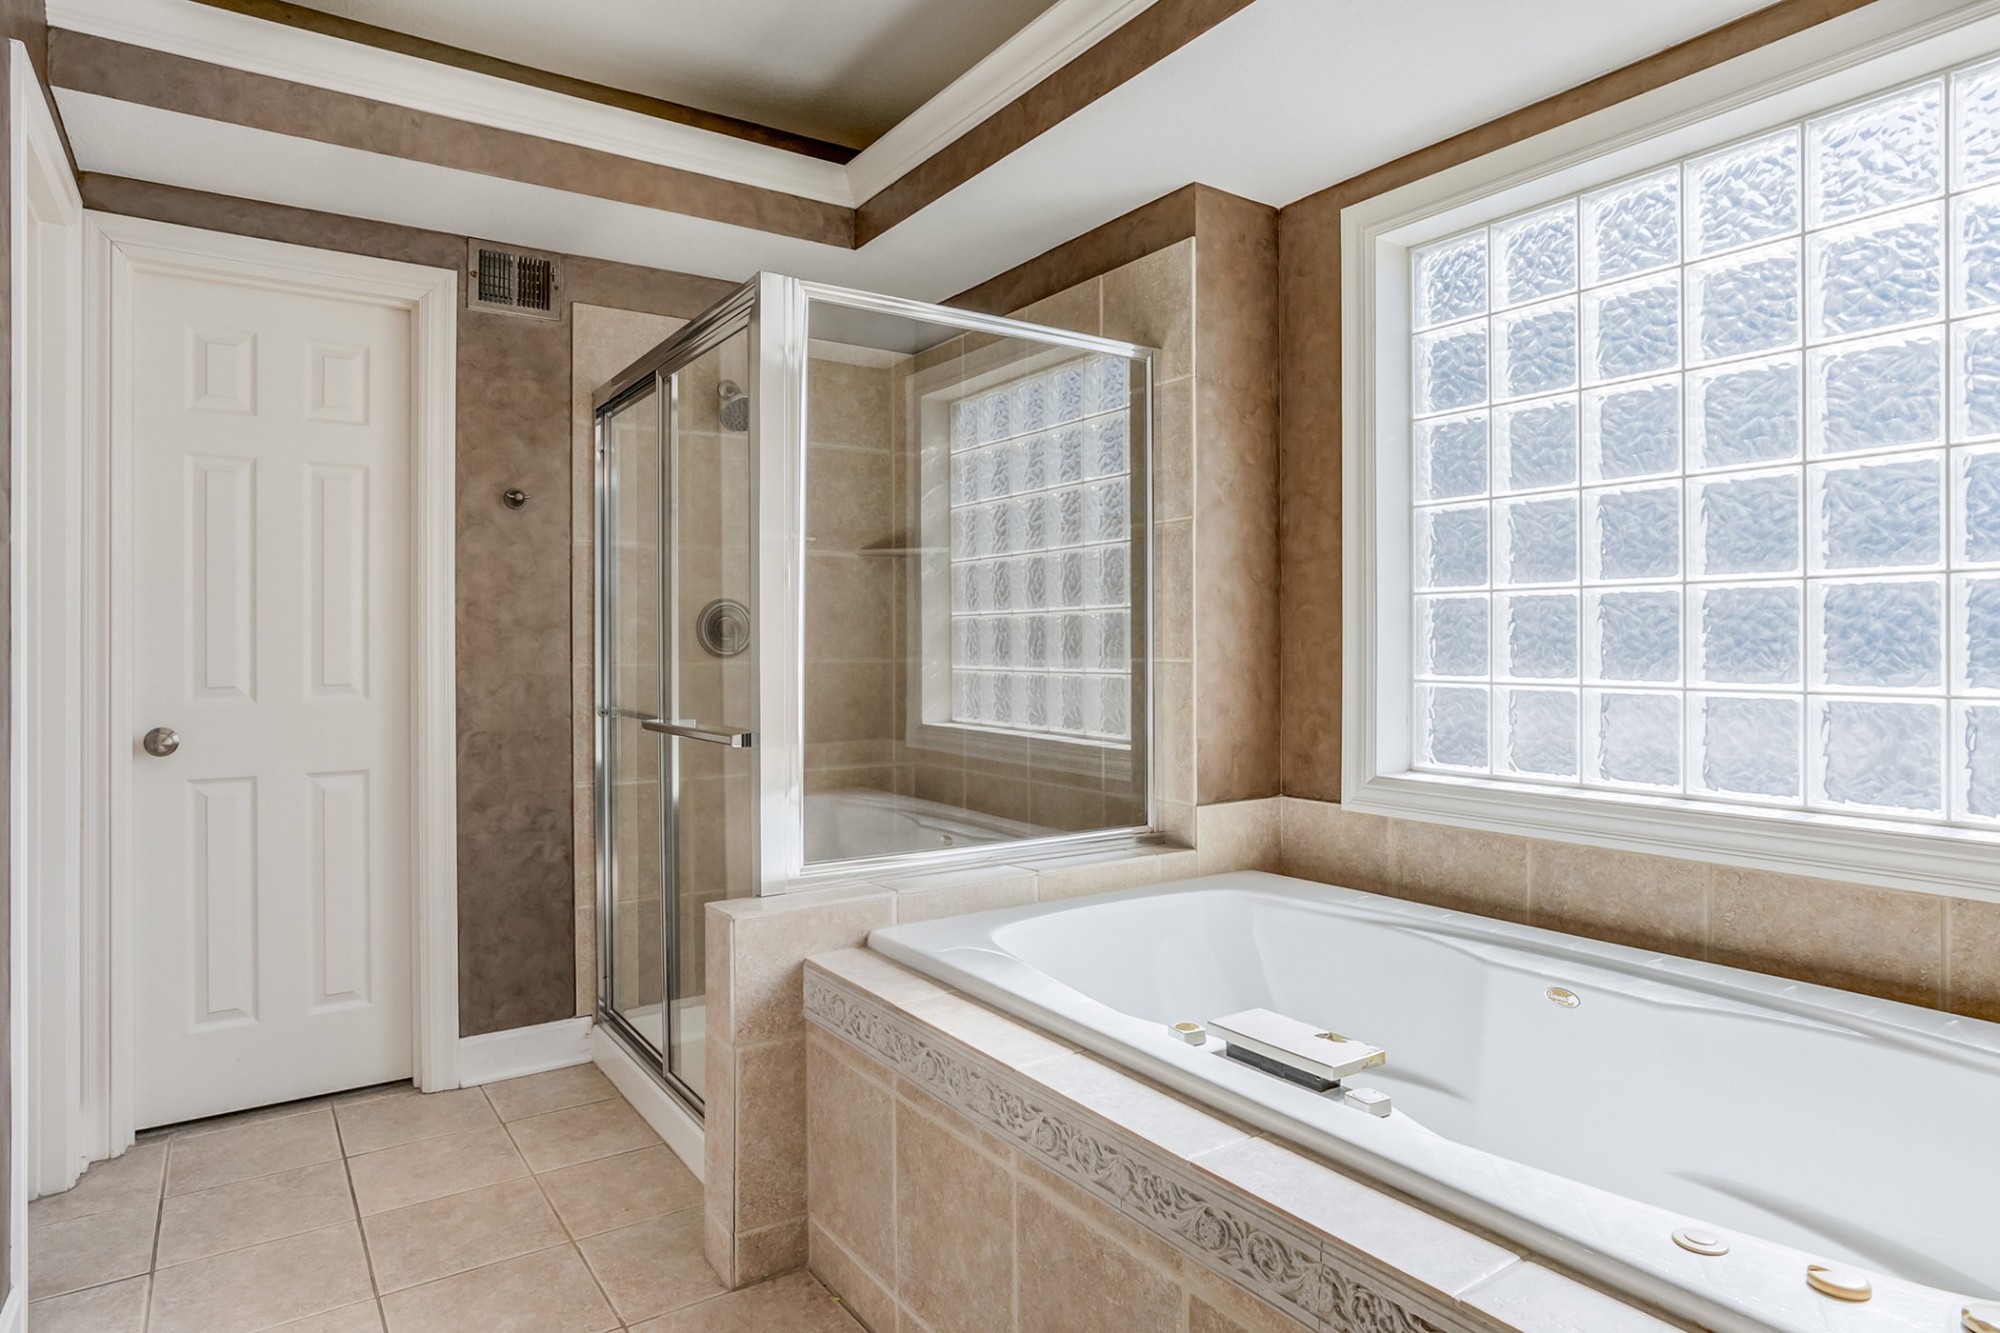 Relaxing Whirlpool tub with privacy glass block window above, separate walk-in shower, private water closet, large tile flooring & a walk-in closet.